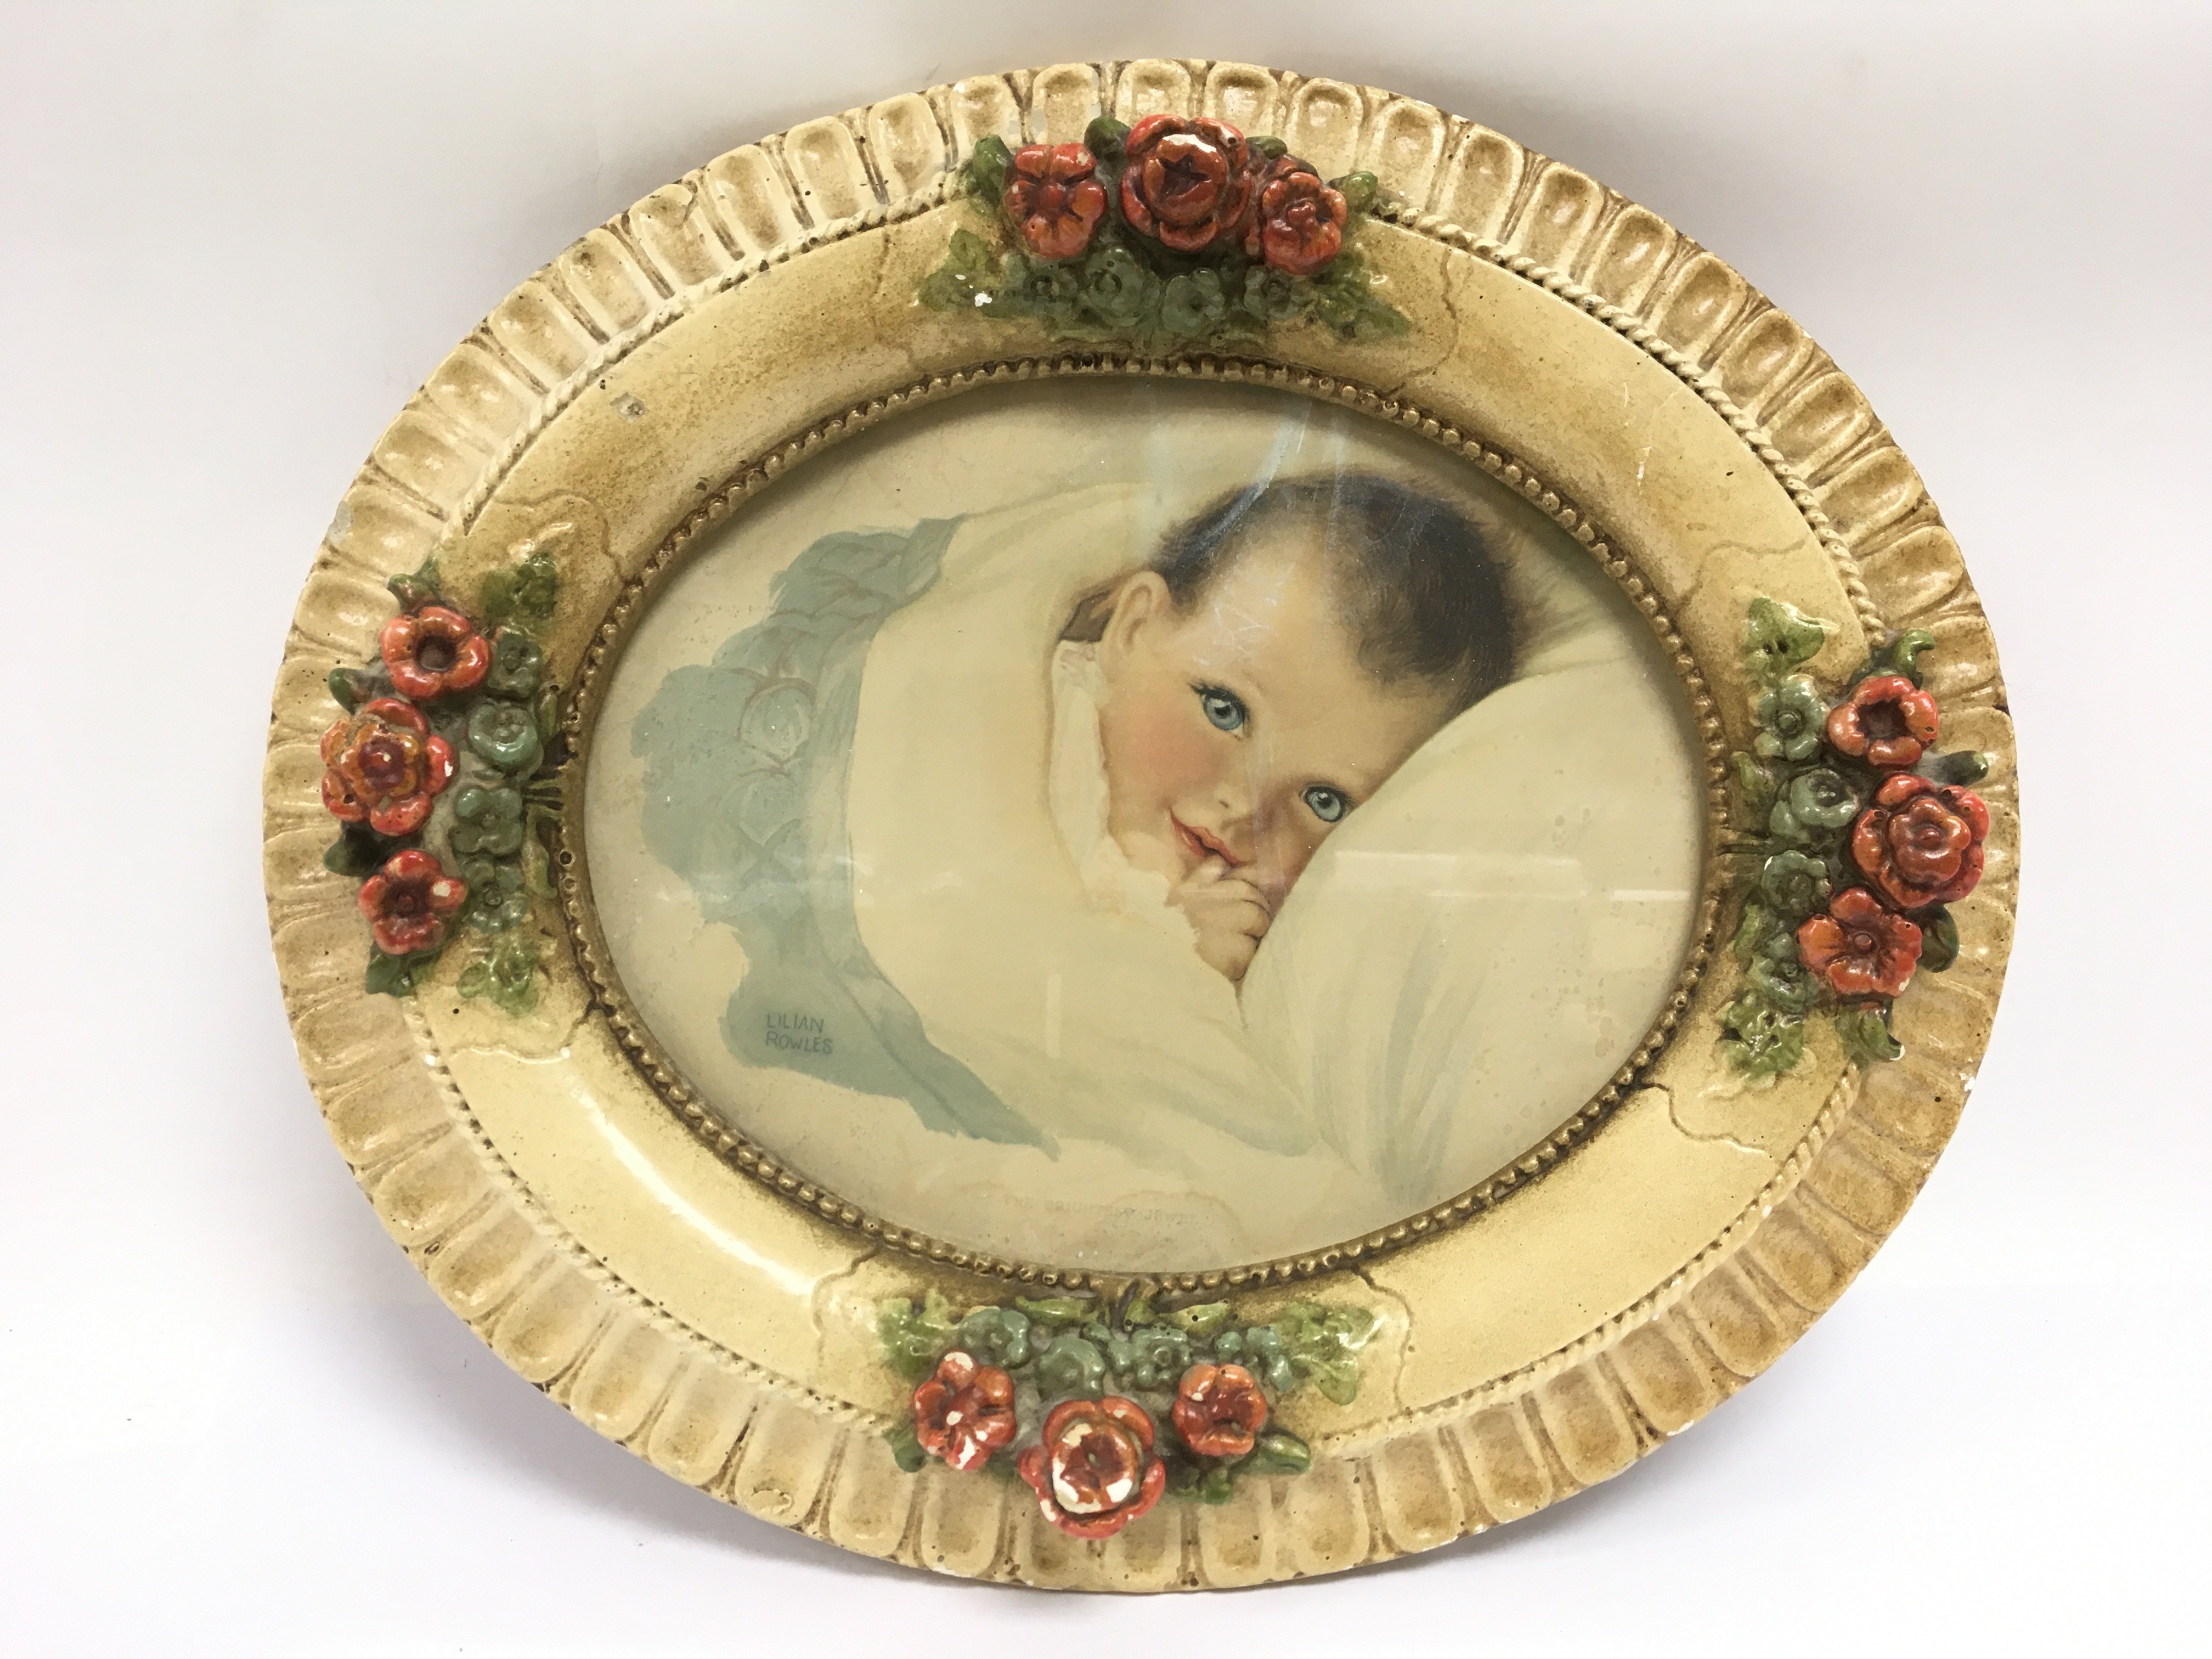 A Lilian Rowles print of an infant housed in a plaster oval shaped frame.